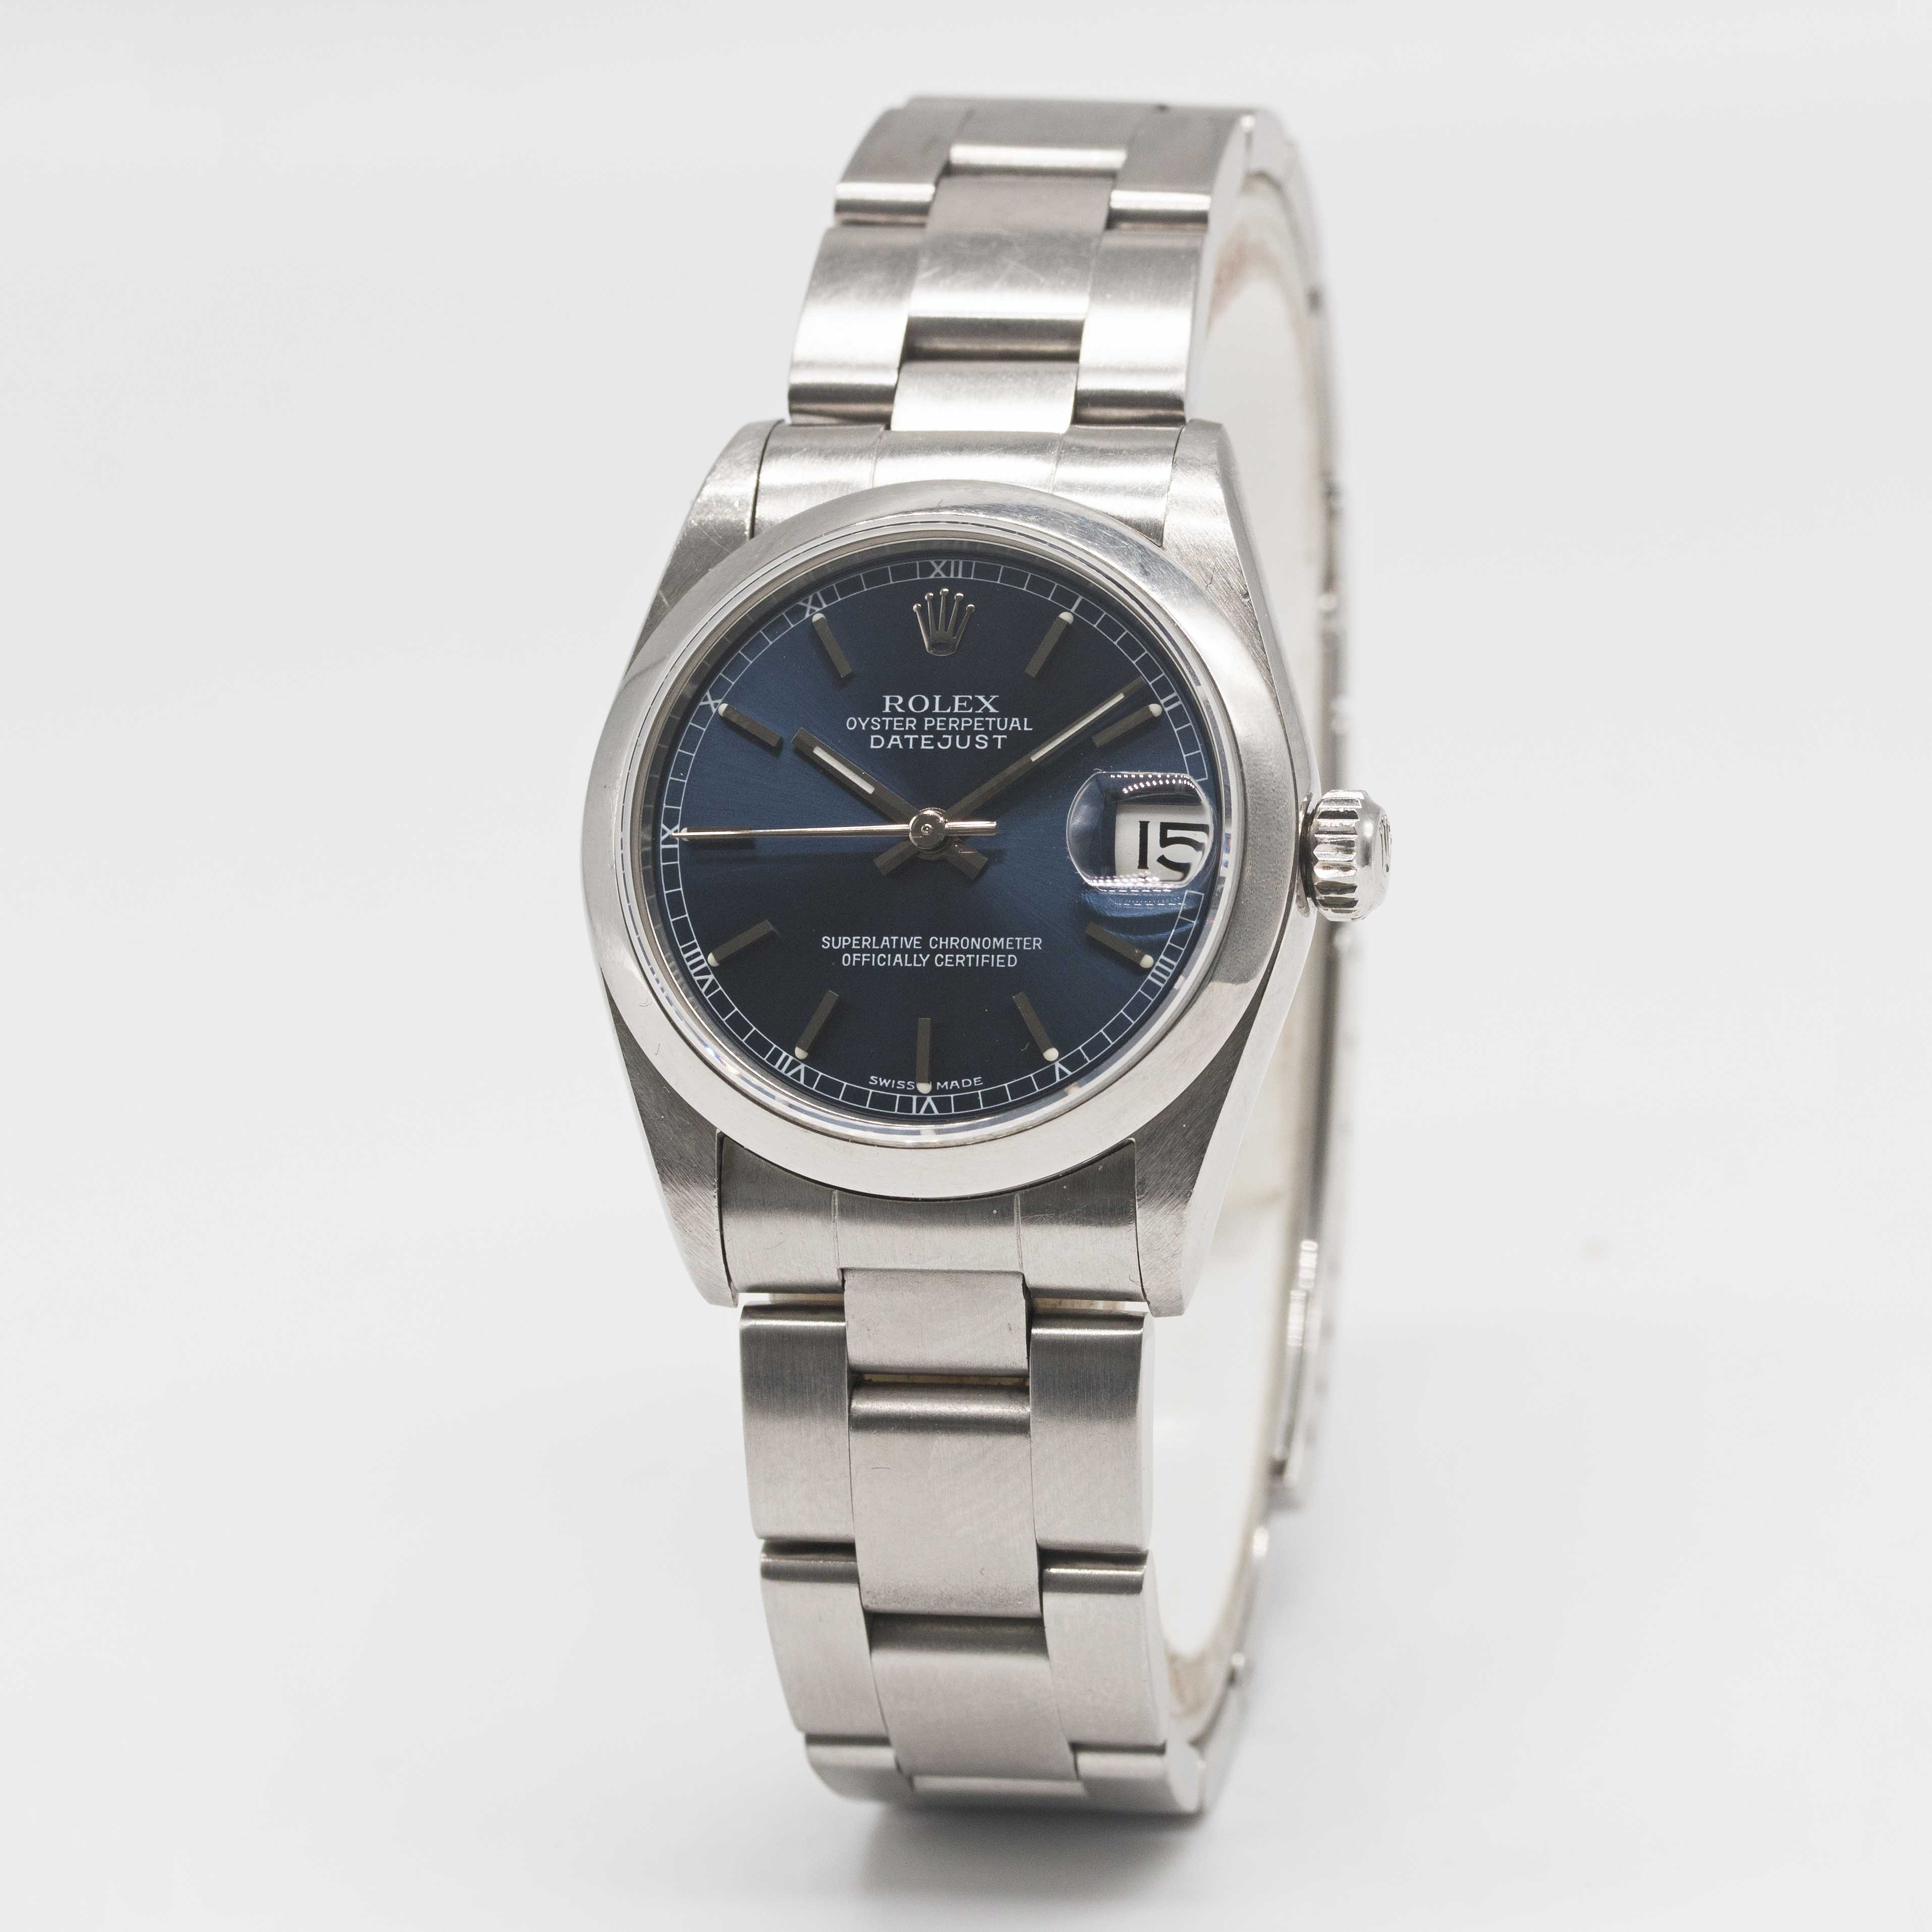 A MID SIZE STAINLESS STEEL ROLEX OYSTER PERPETUAL DATEJUST BRACELET WATCH CIRCA 2001, REF. 78240 - Image 3 of 9